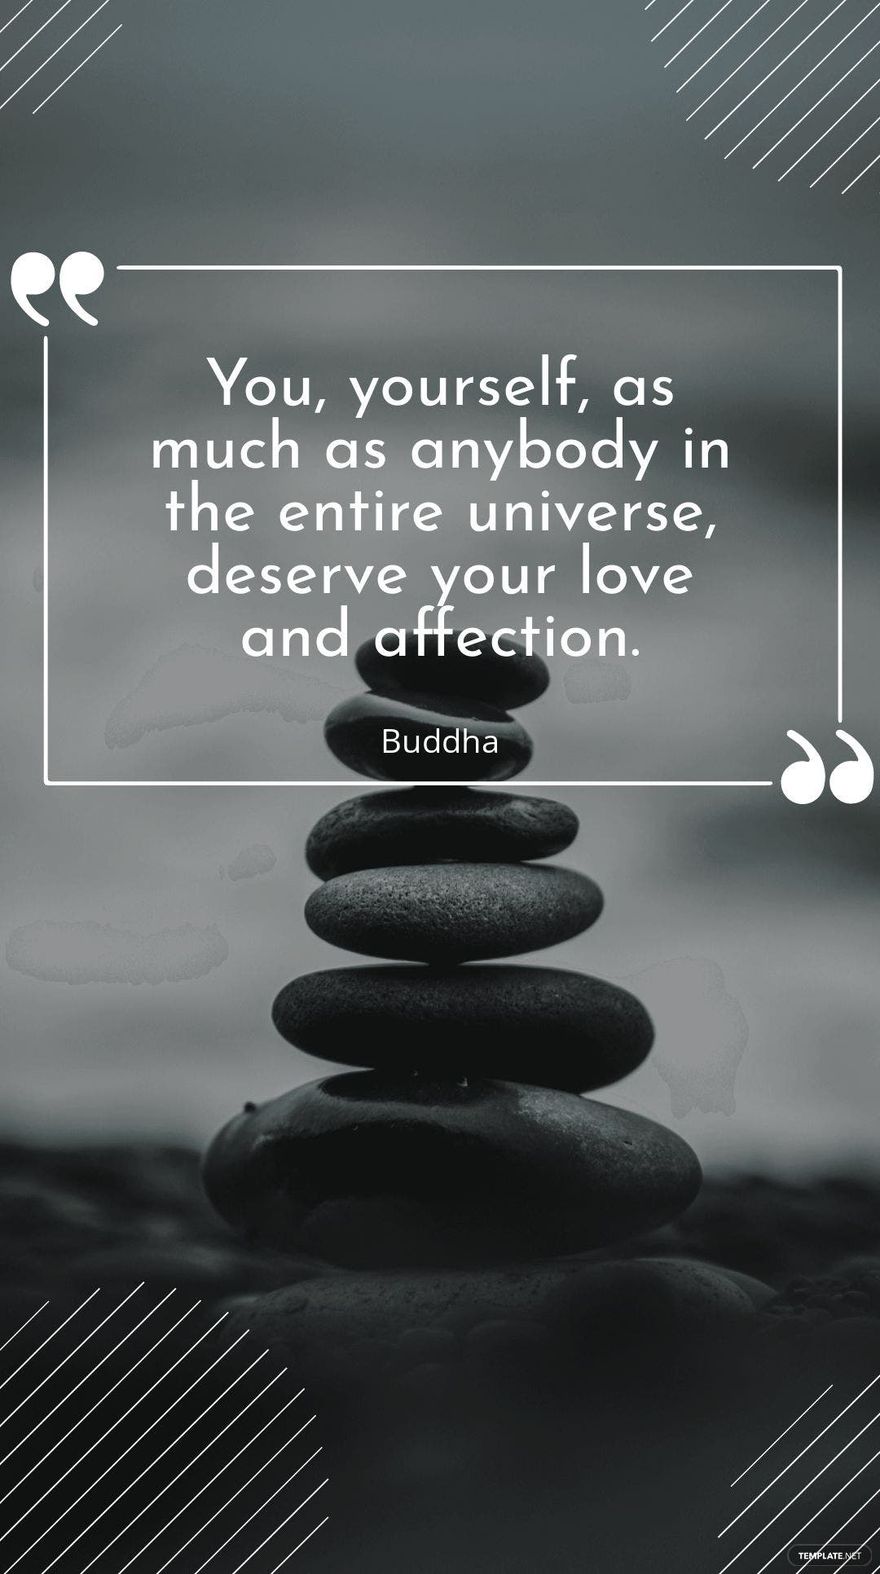 Free Buddha - “You, yourself, as much as anybody in the entire universe, deserve your love and affection.” 